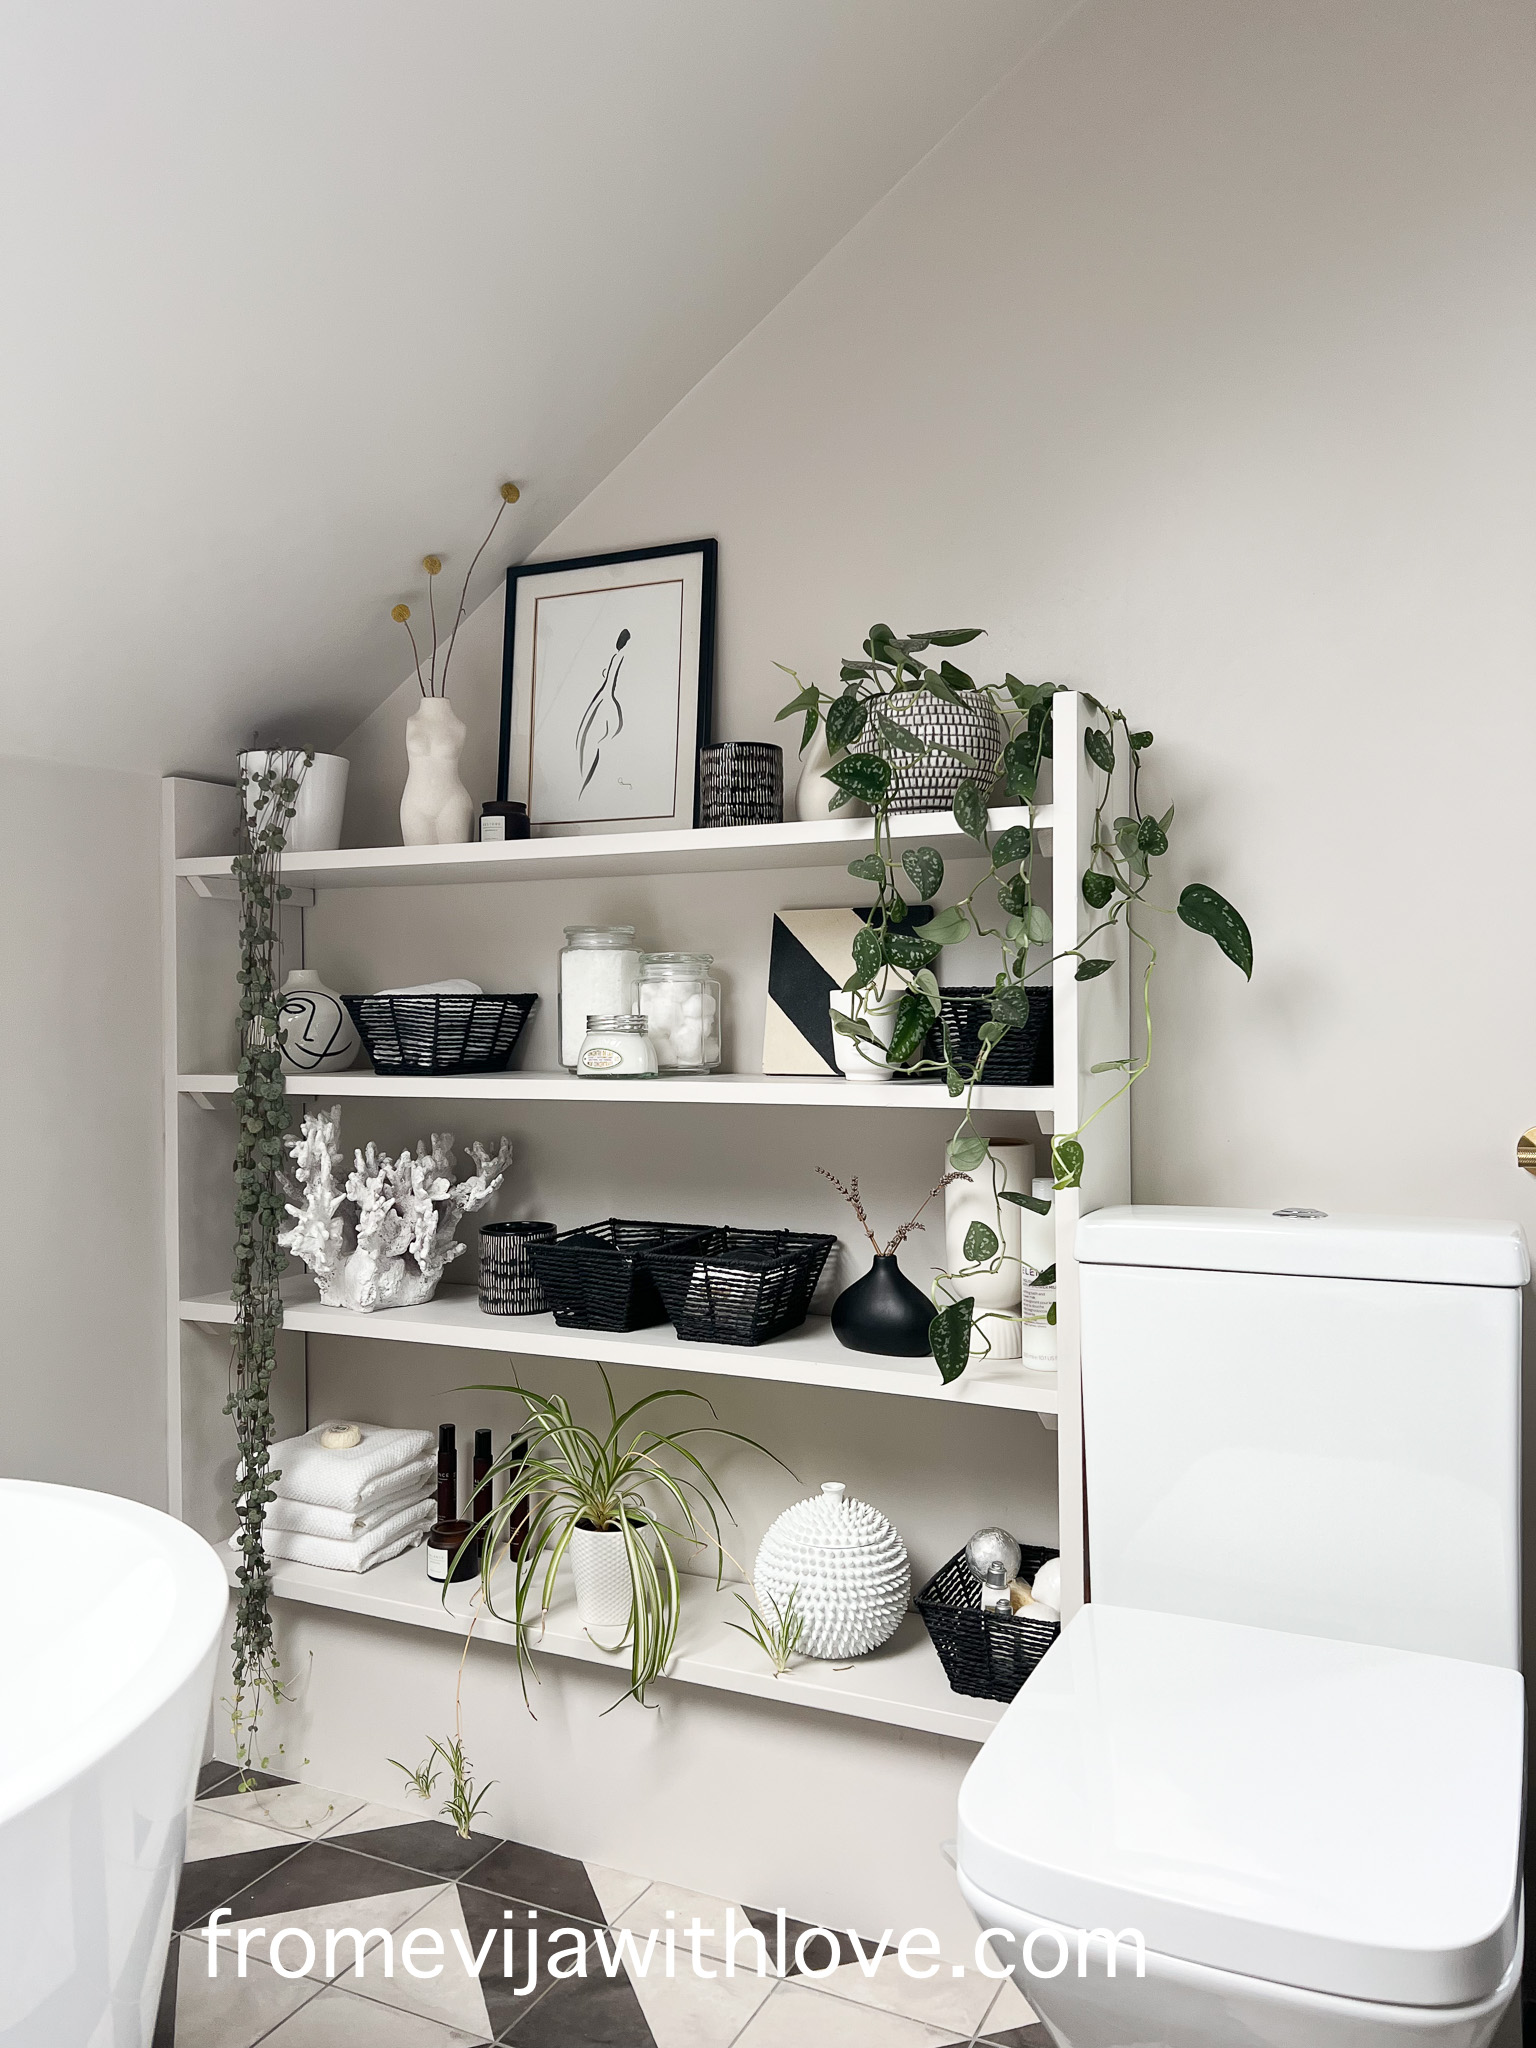 Renovation Diary: Bathroom and our custom built shelves - From Evija with Love